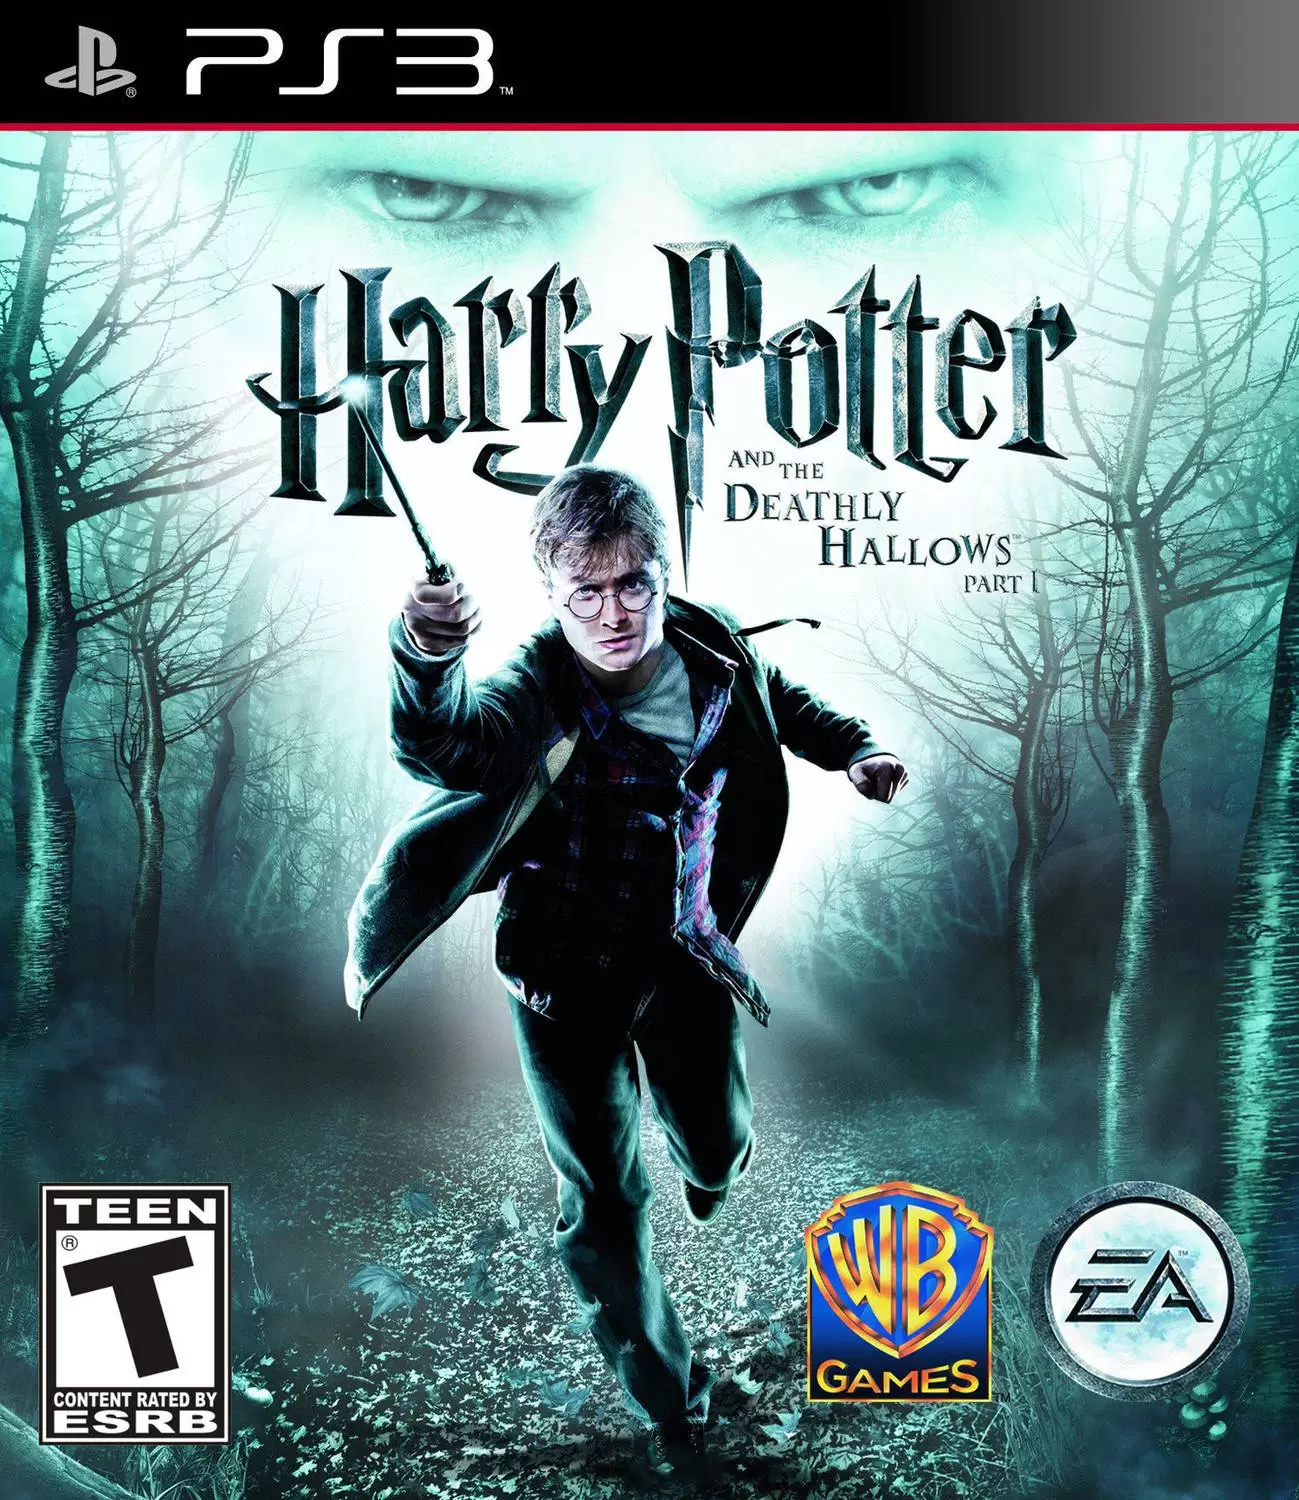 PS3 Games - Harry Potter and the Deathly Hallows Part 1